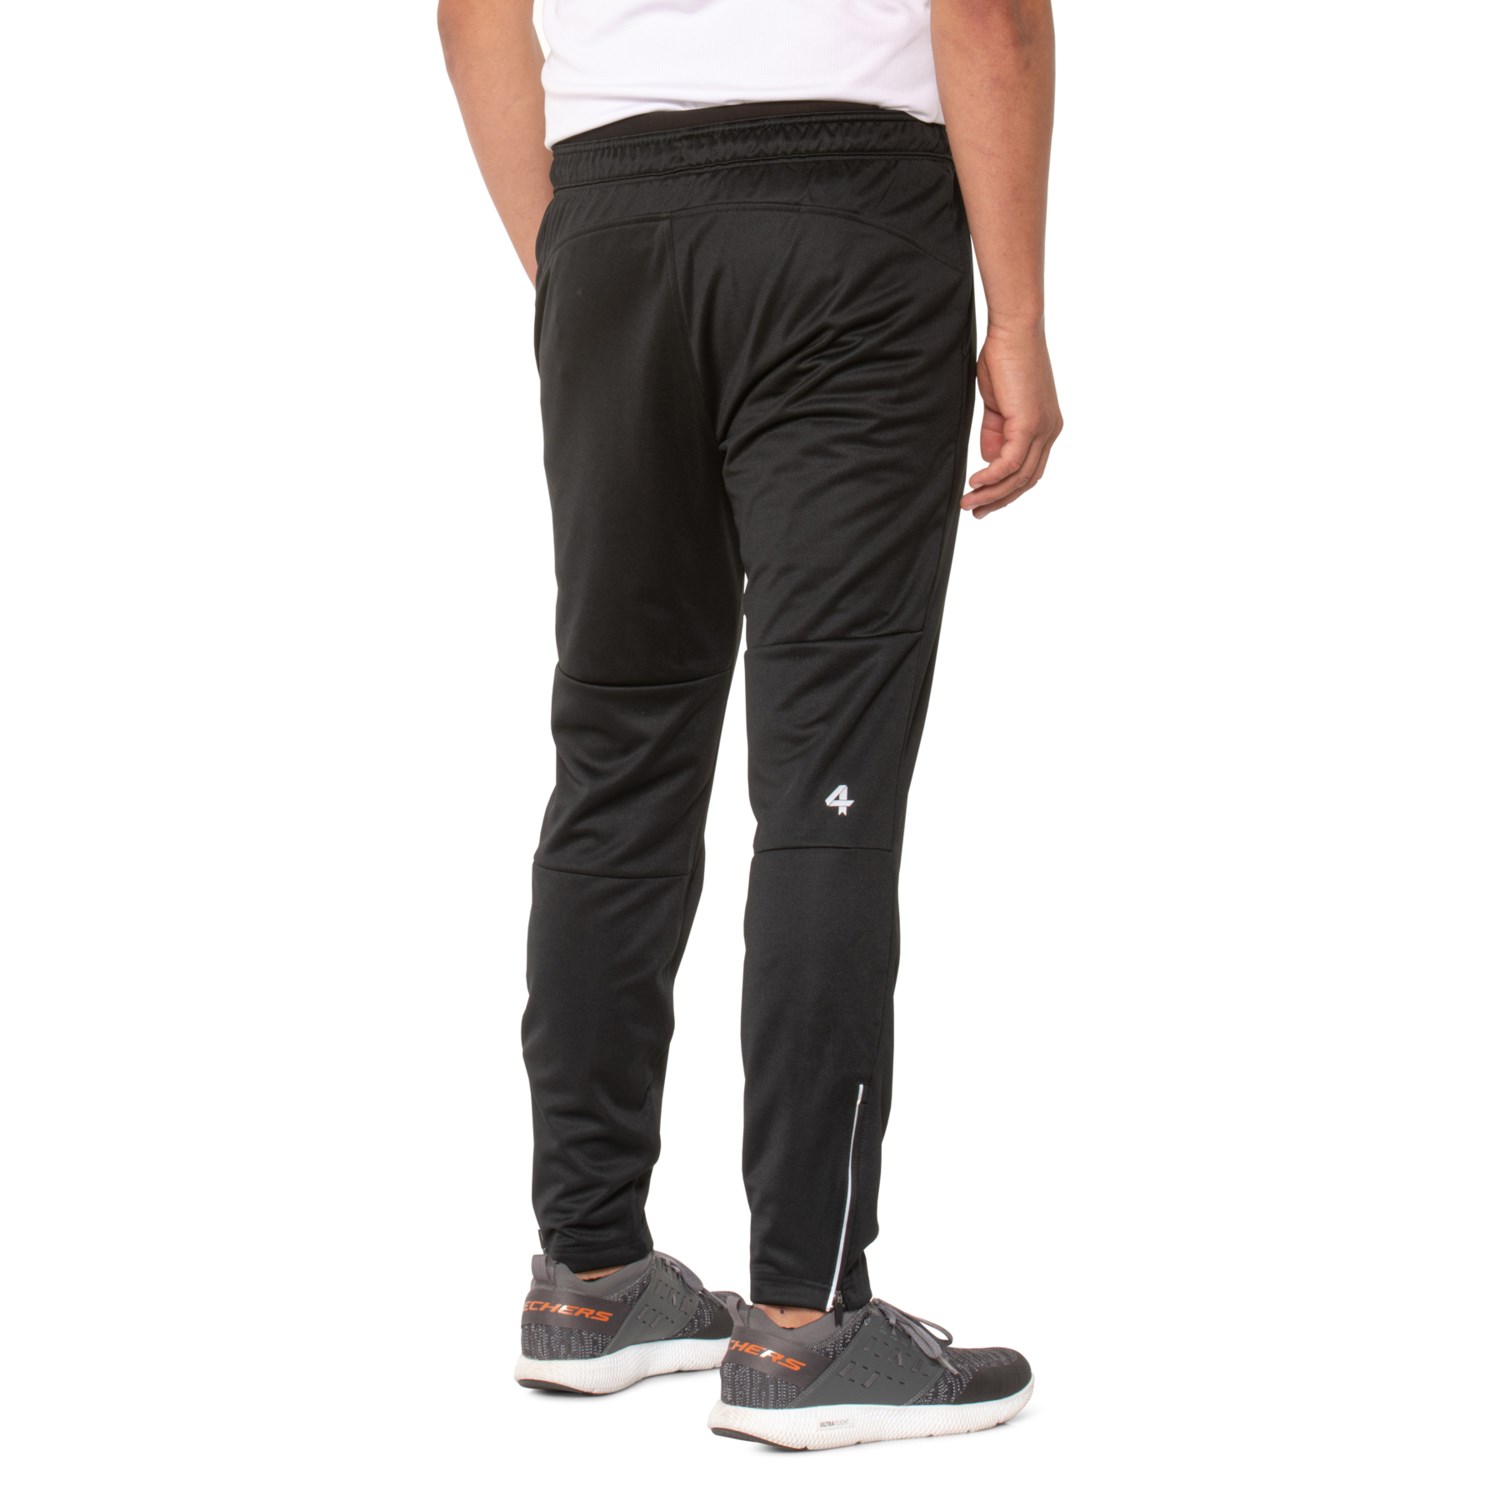 FOUR LAPS Relay Track Sweatpants (For Men) - Save 62%